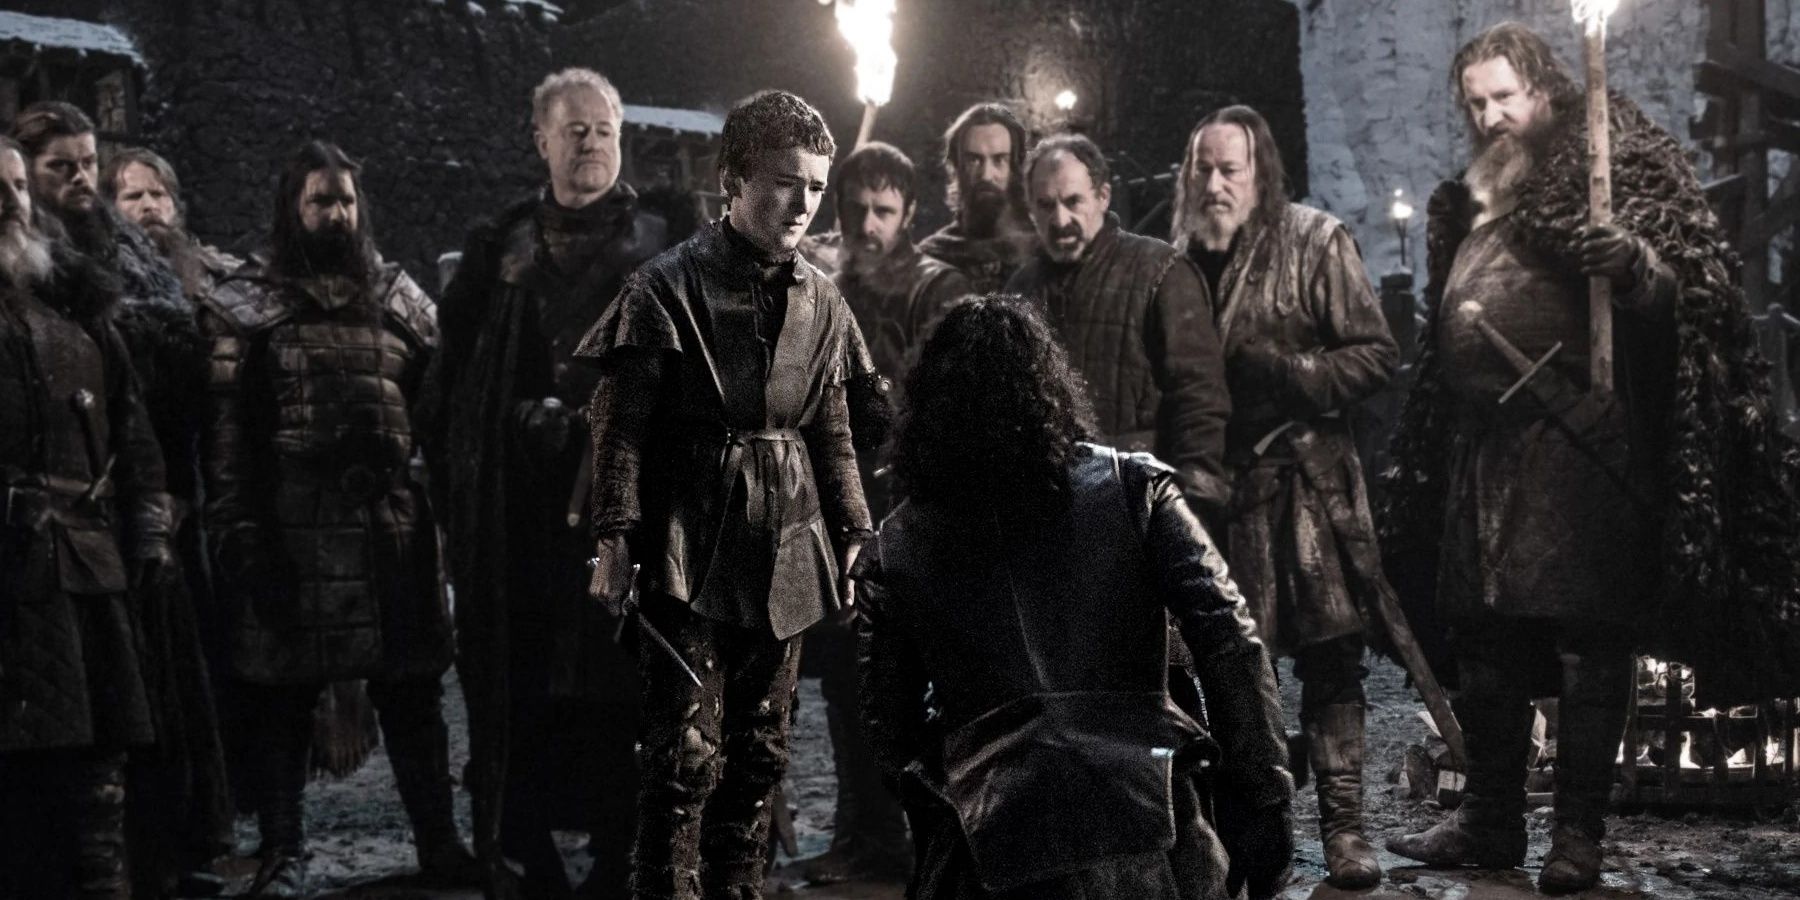 Jon is stabbed by the Night's Watch traitors in Game of Thrones.